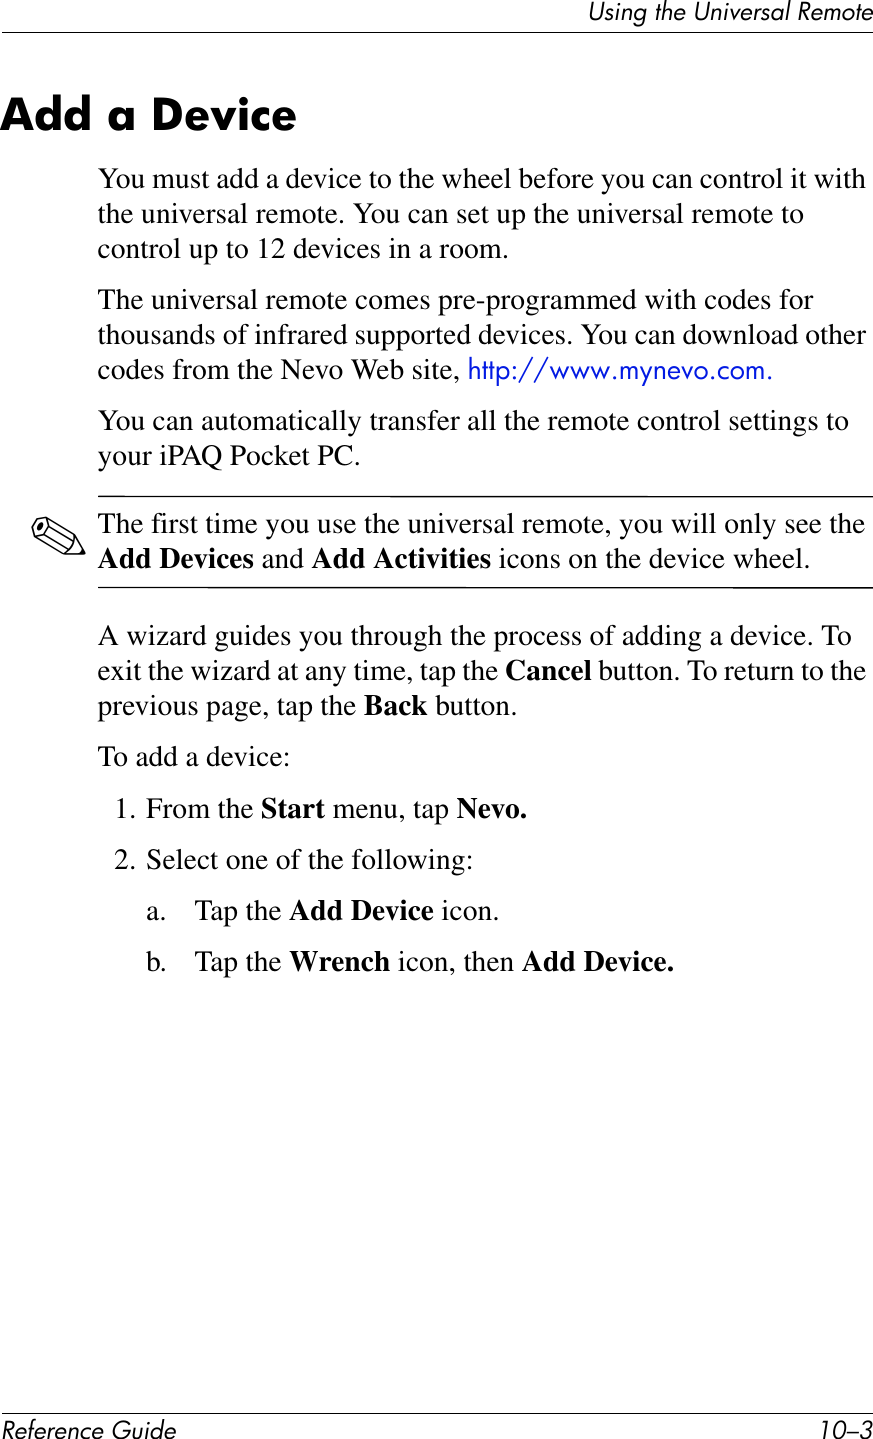 UL*%2&apos;1Q&quot;&apos;U%*,&quot;$L4K&apos;!&quot;?71&quot;!&quot;#&quot;$&quot;%&amp;&quot;&apos;()*+&quot; .I/9,**&amp;;&amp;U&quot;N)%&quot;You must add a device to the wheel before you can control it with the universal remote. You can set up the universal remote to control up to 12 devices in a room.The universal remote comes pre-programmed with codes for thousands of infrared supported devices. You can download other codes from the Nevo Web site, !,,&quot;:^^EEEG5F6+P(G)(5GYou can automatically transfer all the remote control settings to your iPAQ Pocket PC.✎The first time you use the universal remote, you will only see the Add Devices and Add Activities icons on the device wheel.A wizard guides you through the process of adding a device. To exit the wizard at any time, tap the Cancel button. To return to the previous page, tap the Back button.To add a device:1. From the Start menu, tap Nevo.2. Select one of the following:a. Tap the Add Device icon.b. Tap the Wrench icon, then Add Device.